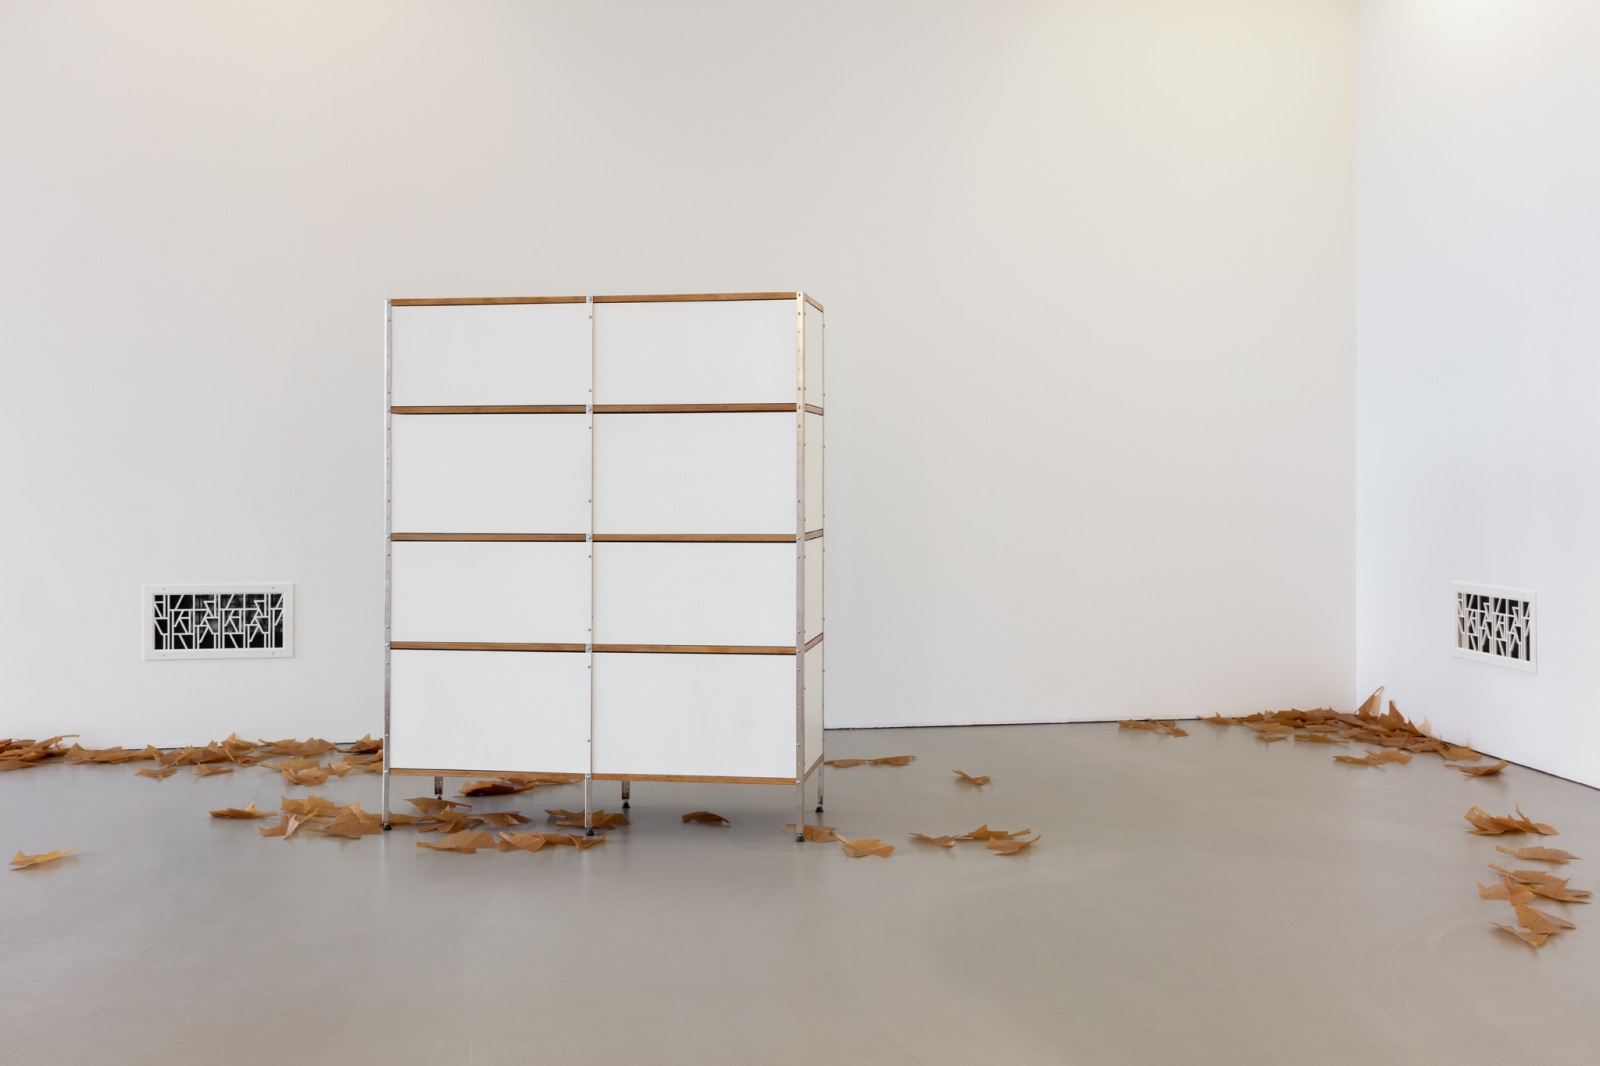 <div class="image_caption_container"><div class="image_caption">Exhibition view: <strong>Recurring Dreams</strong>, FAHRBEREITSCHAFT, haubrok foundation, Berlin, 2021. Photo © Andrea Rossetti</div></div>